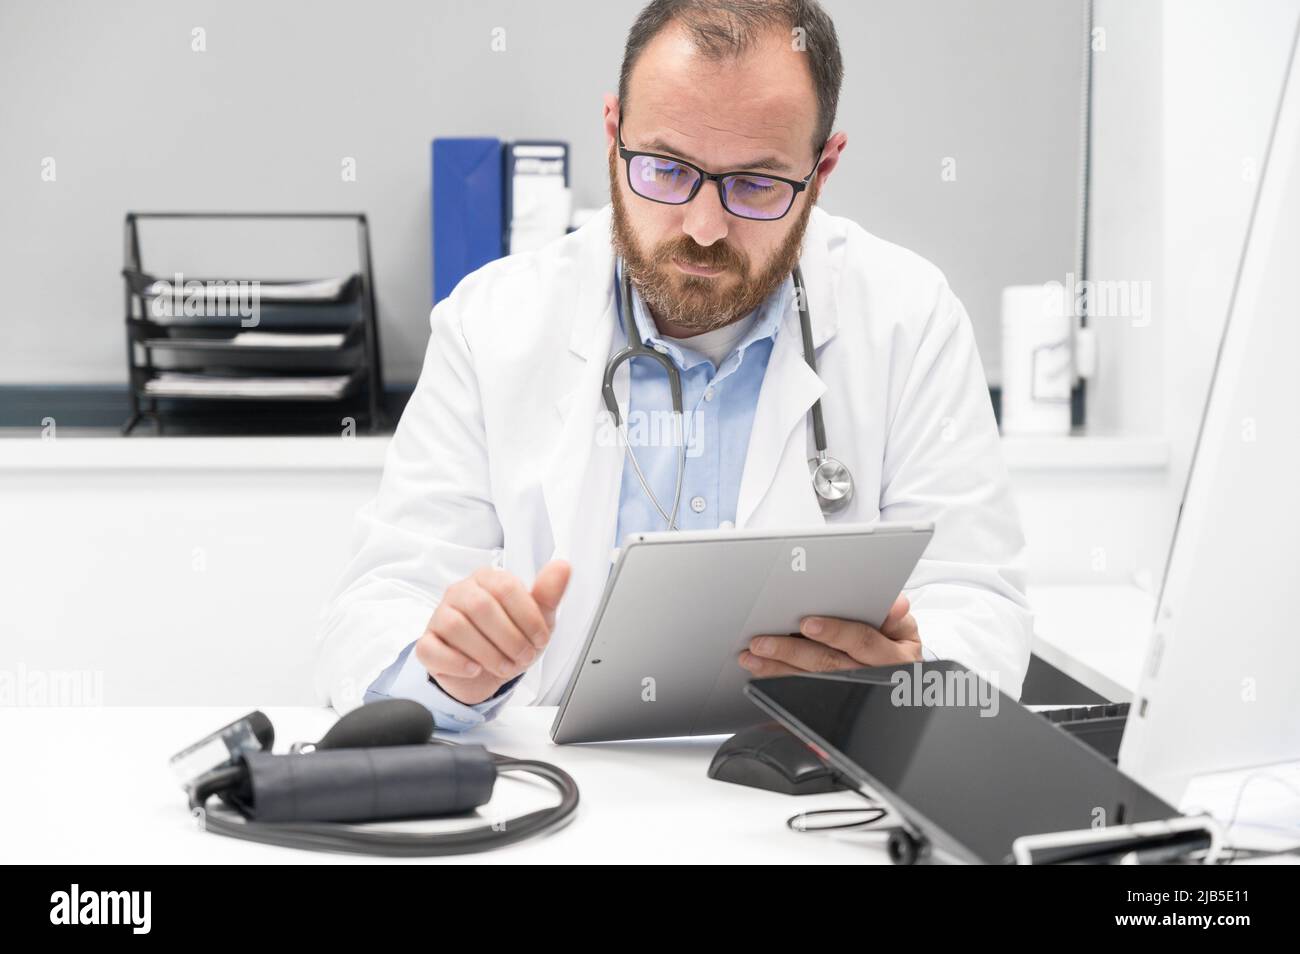 Doctor using his tablet computer at work. High quality photo. Stock Photo